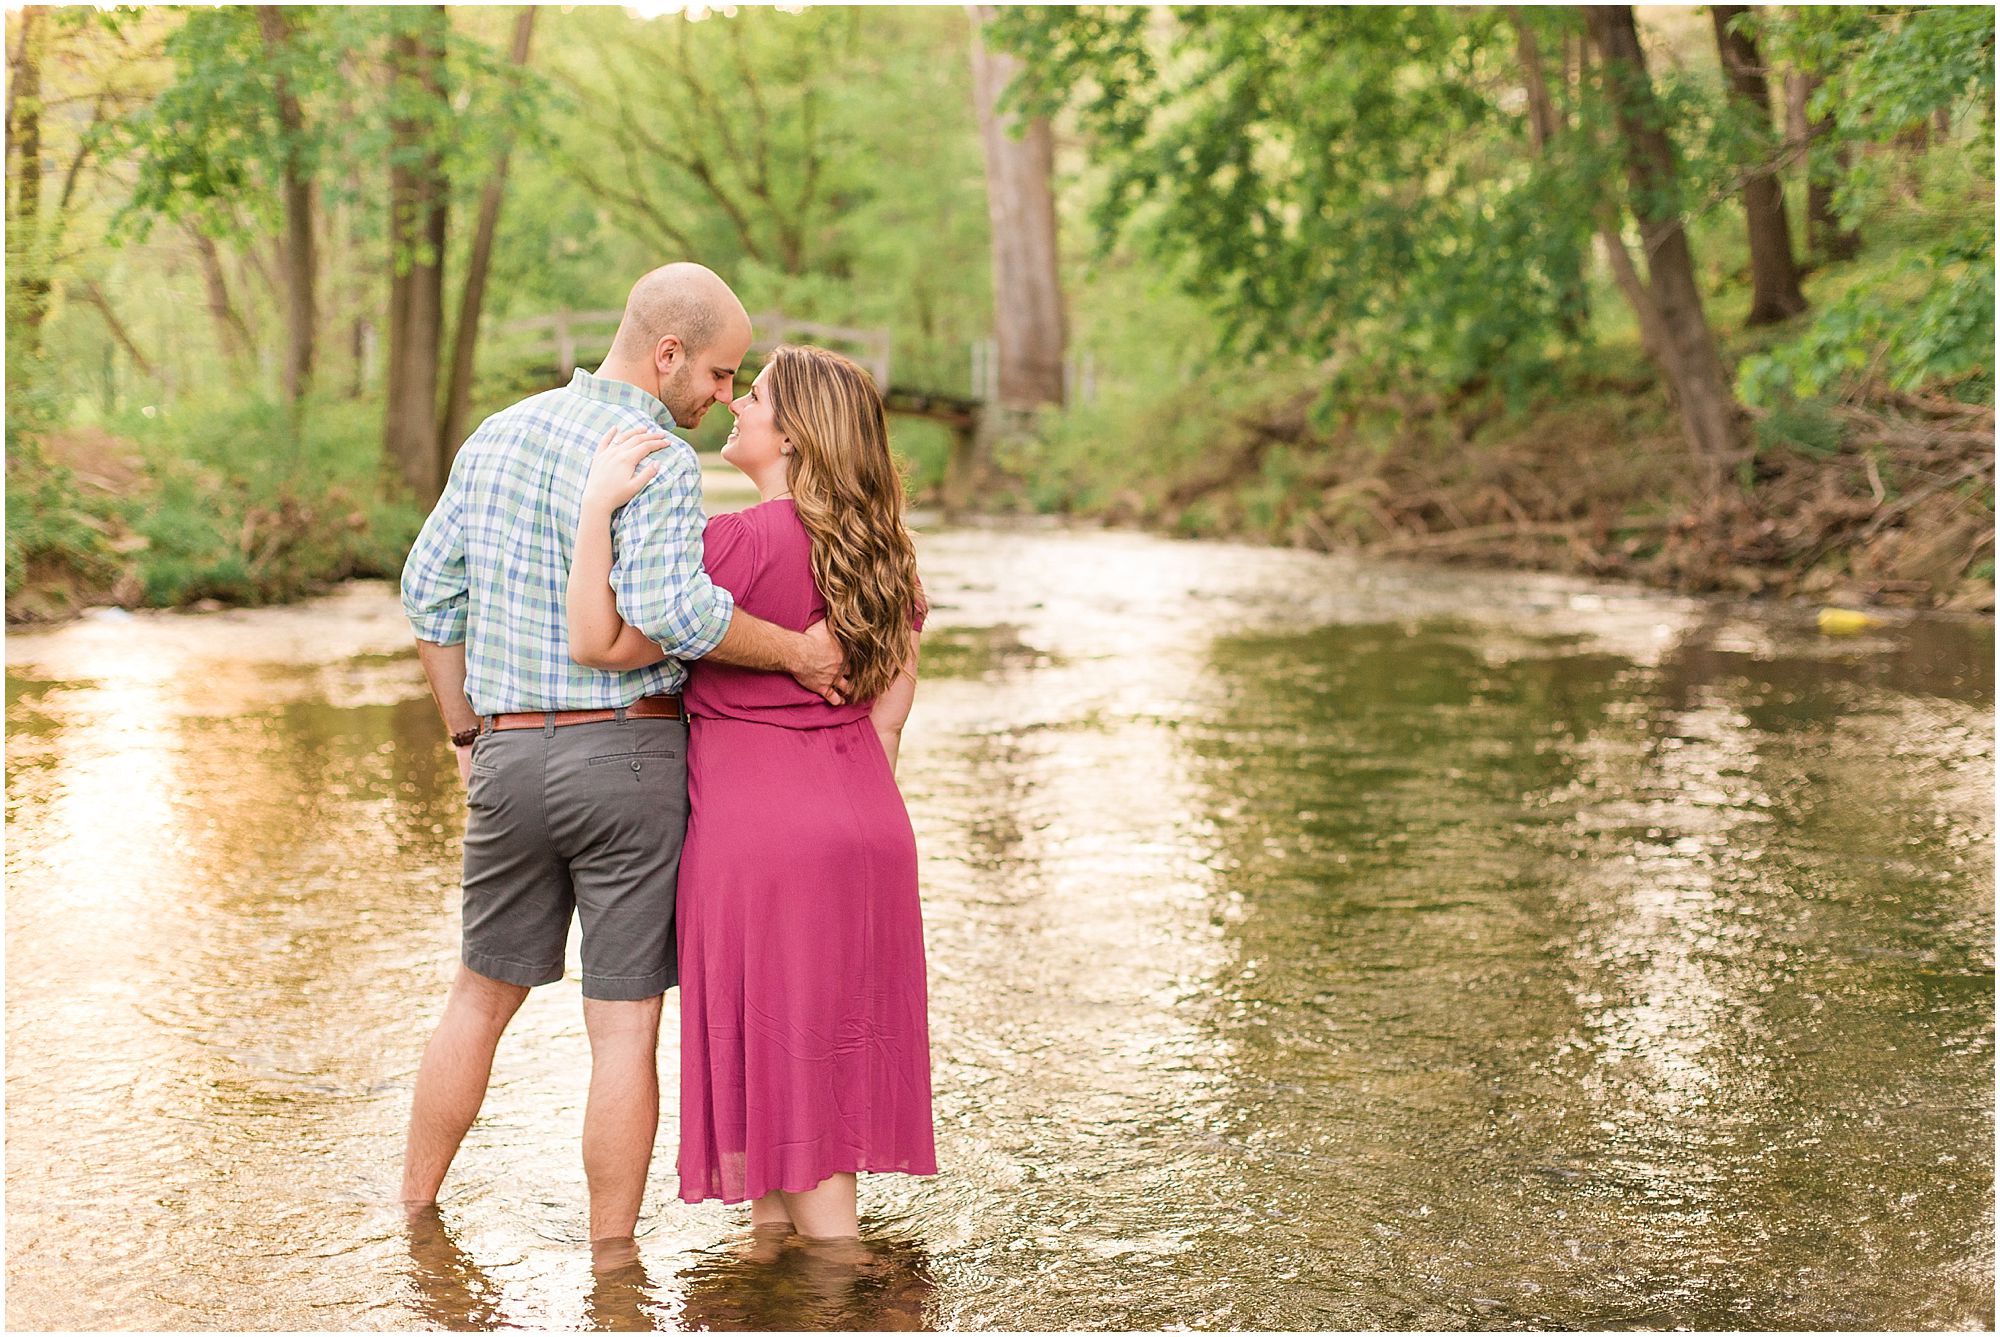 A Colorful Engagement Session at Valley Forge Park